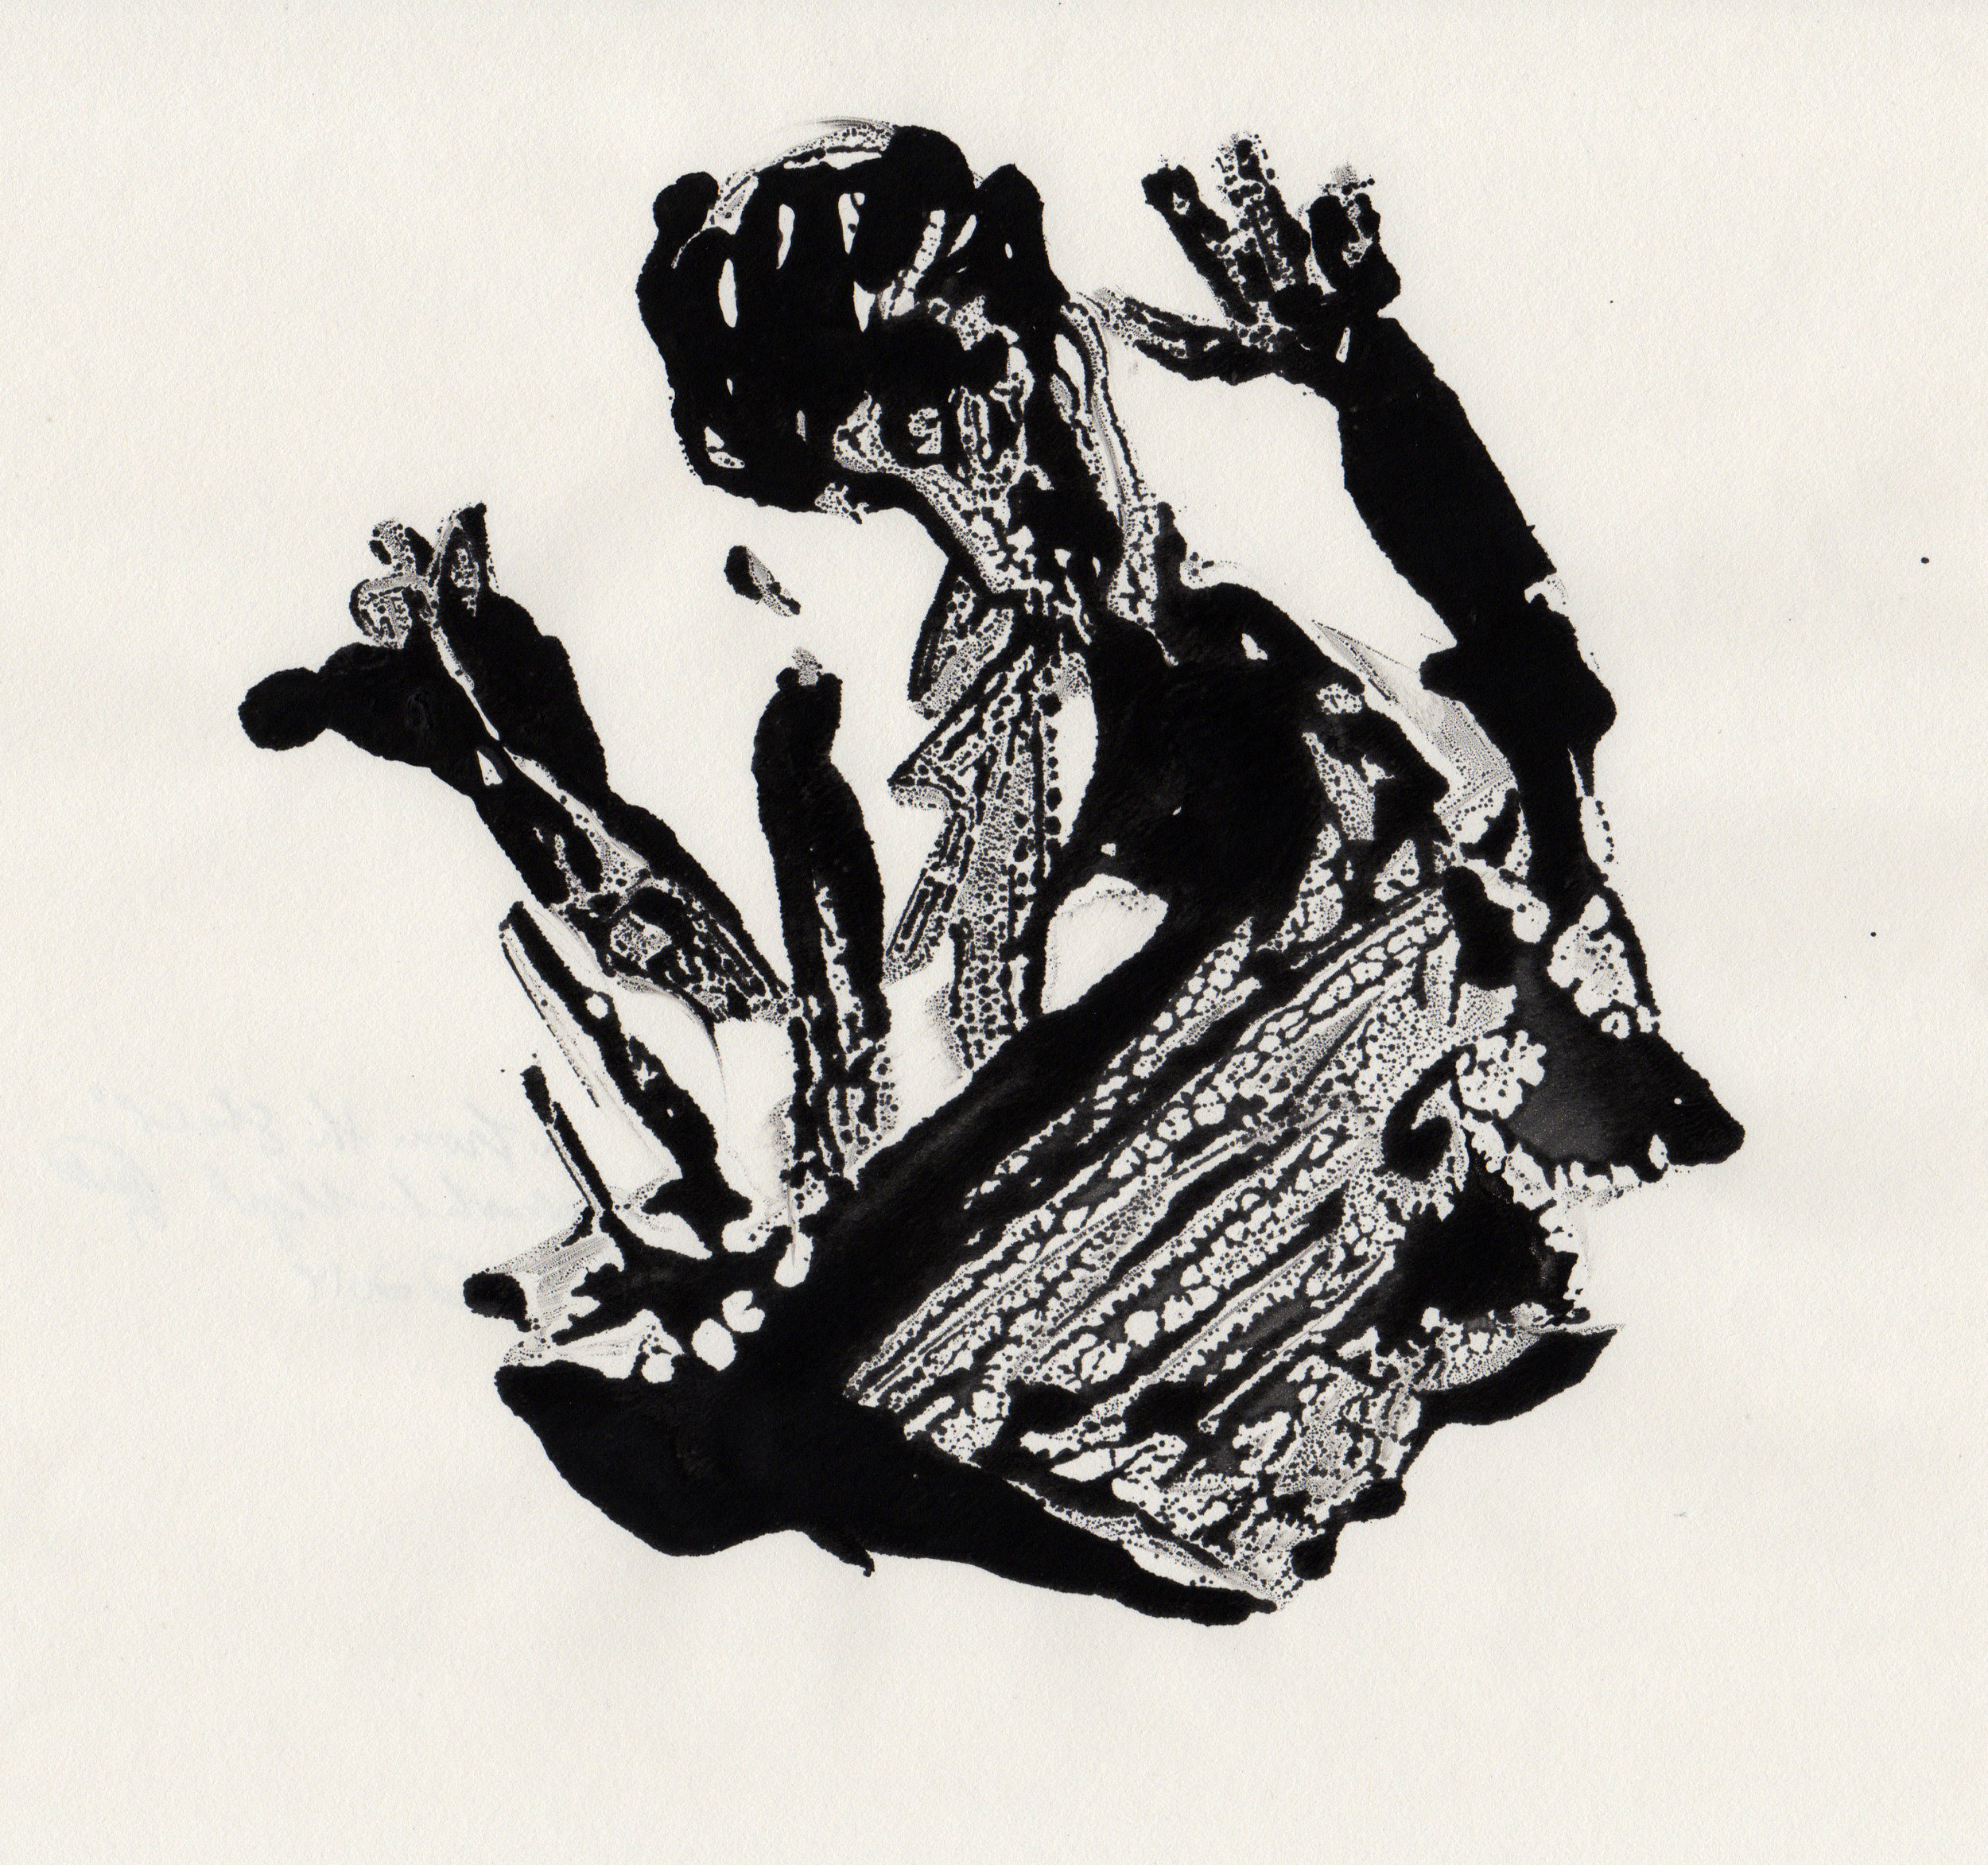 From The Shell, 2014, gelatin monotype, 10x9 inches